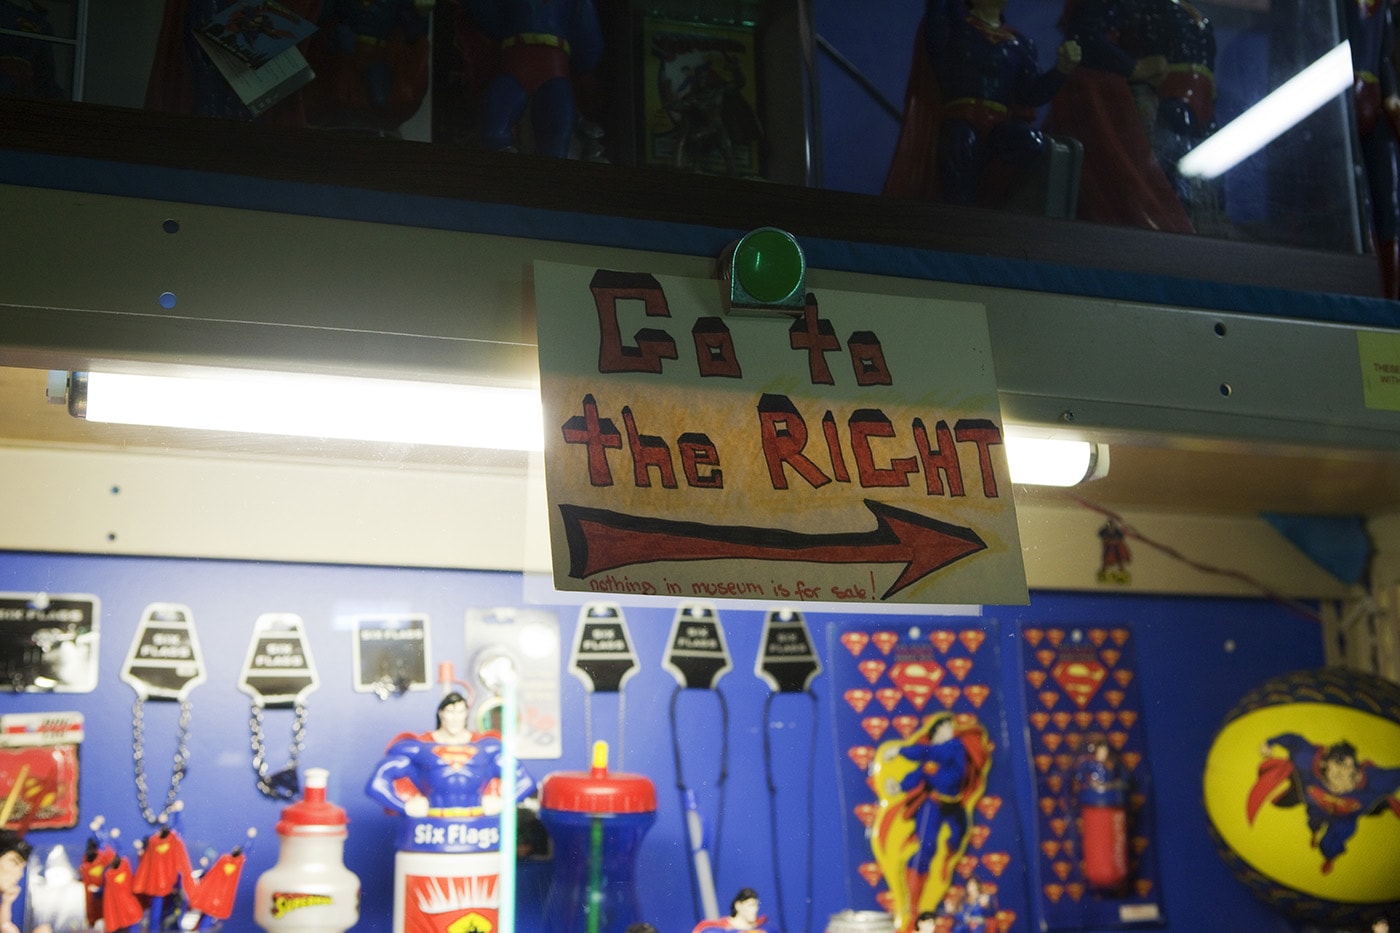 Go to the Right sign at the Super Museum (Superman Museum) in Metropolis, Illinois